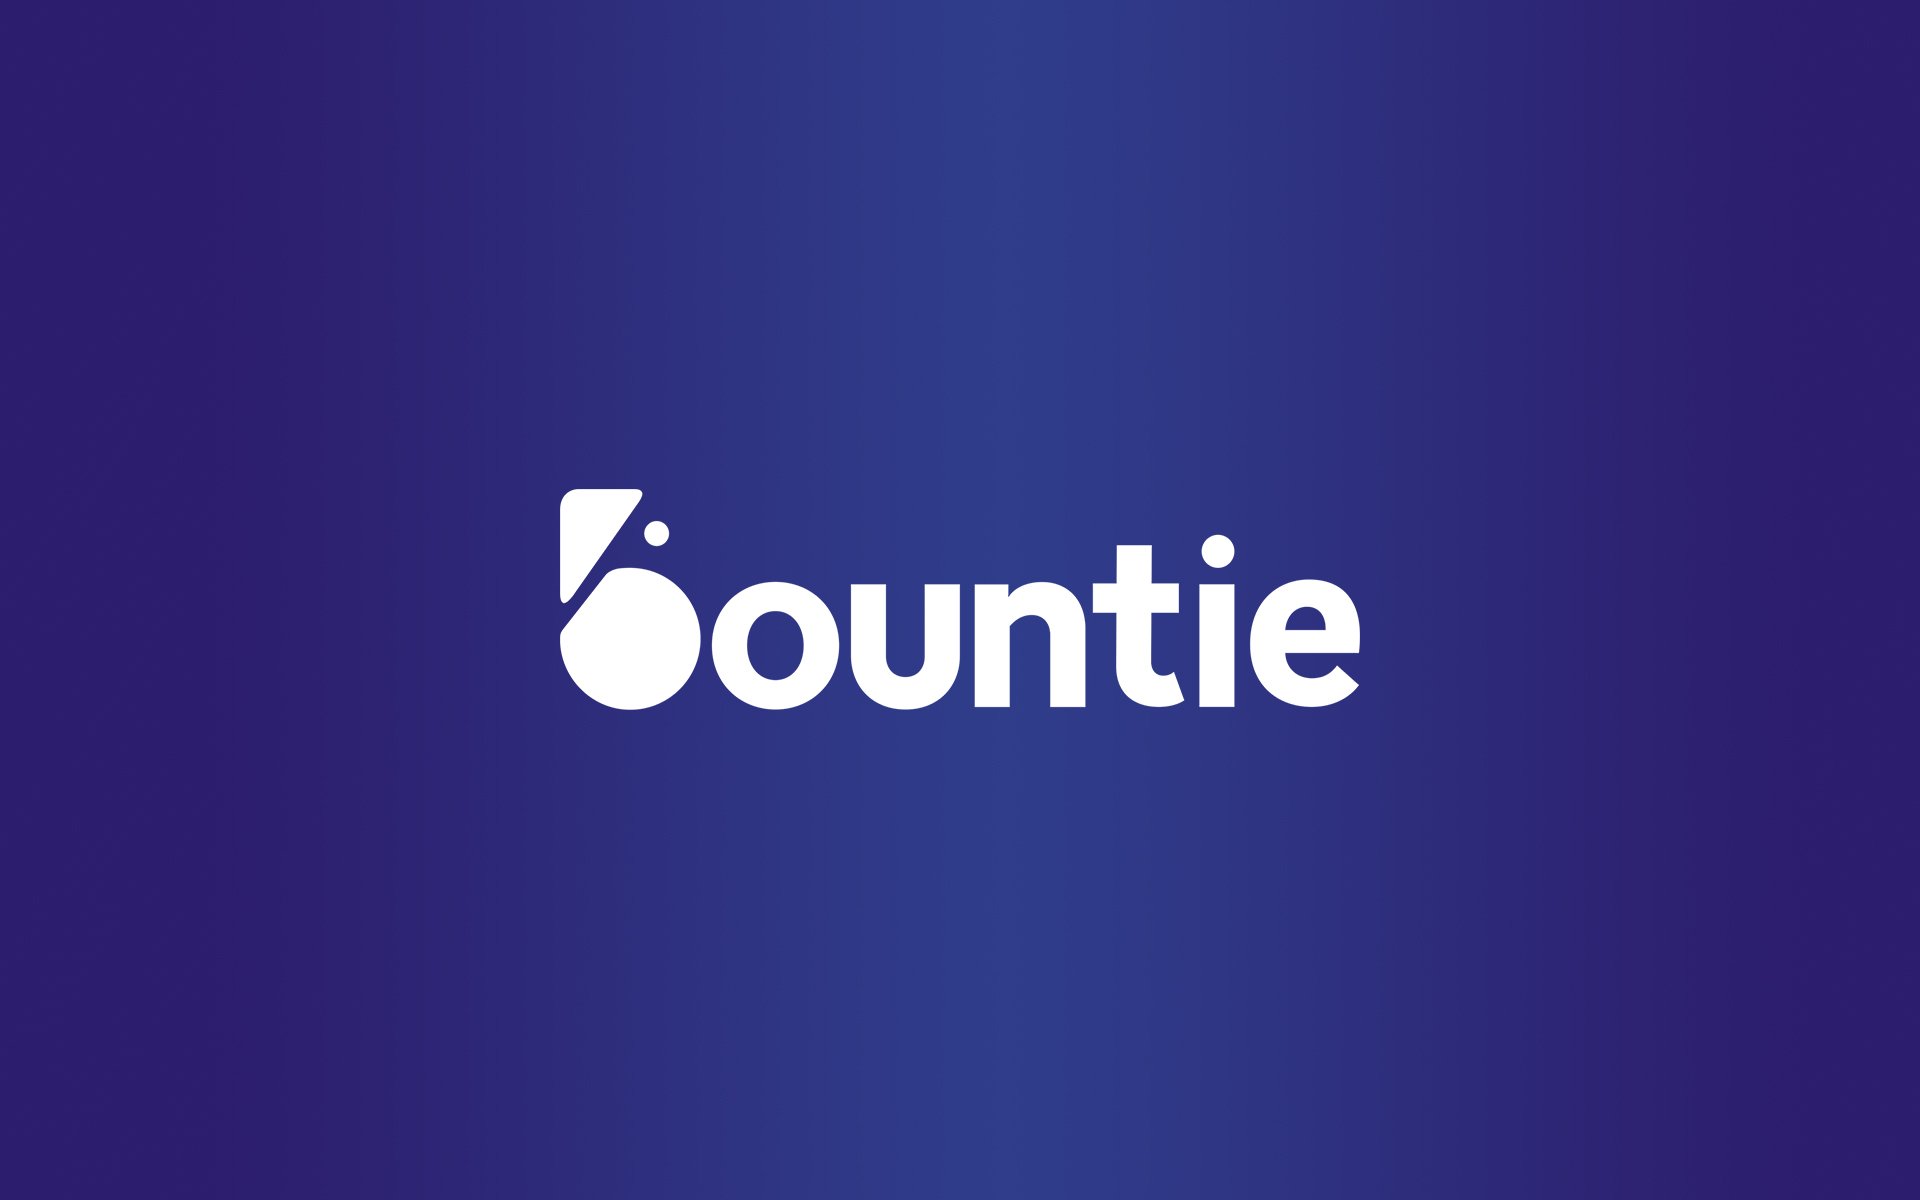 Singapore-Based eSports Platform Bountie Is Launching Their ICO in April 2018 to Enable Gamers to Monetize Their Hobby with Bountie Coins